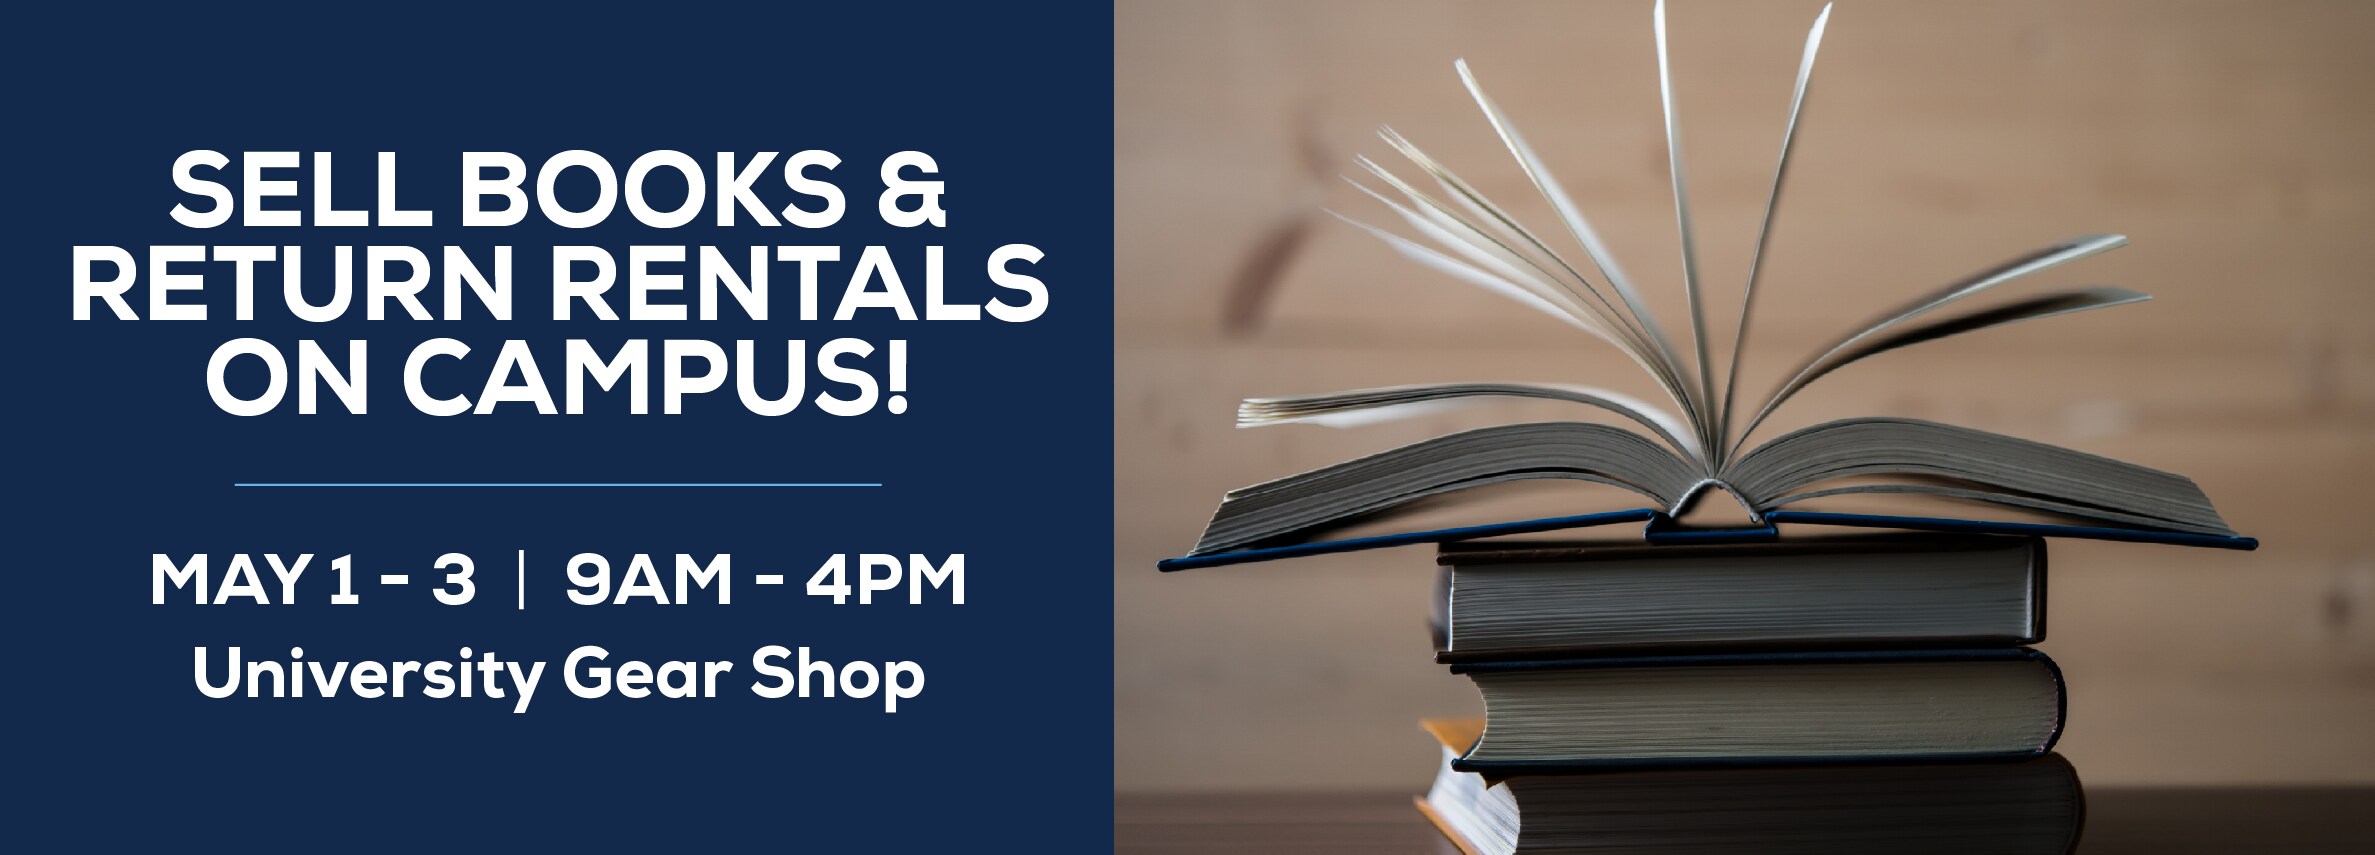 Sell books and return rentals on campus! May 1 - 3. 9am to 4pm at the Lasell University Gear Shop.